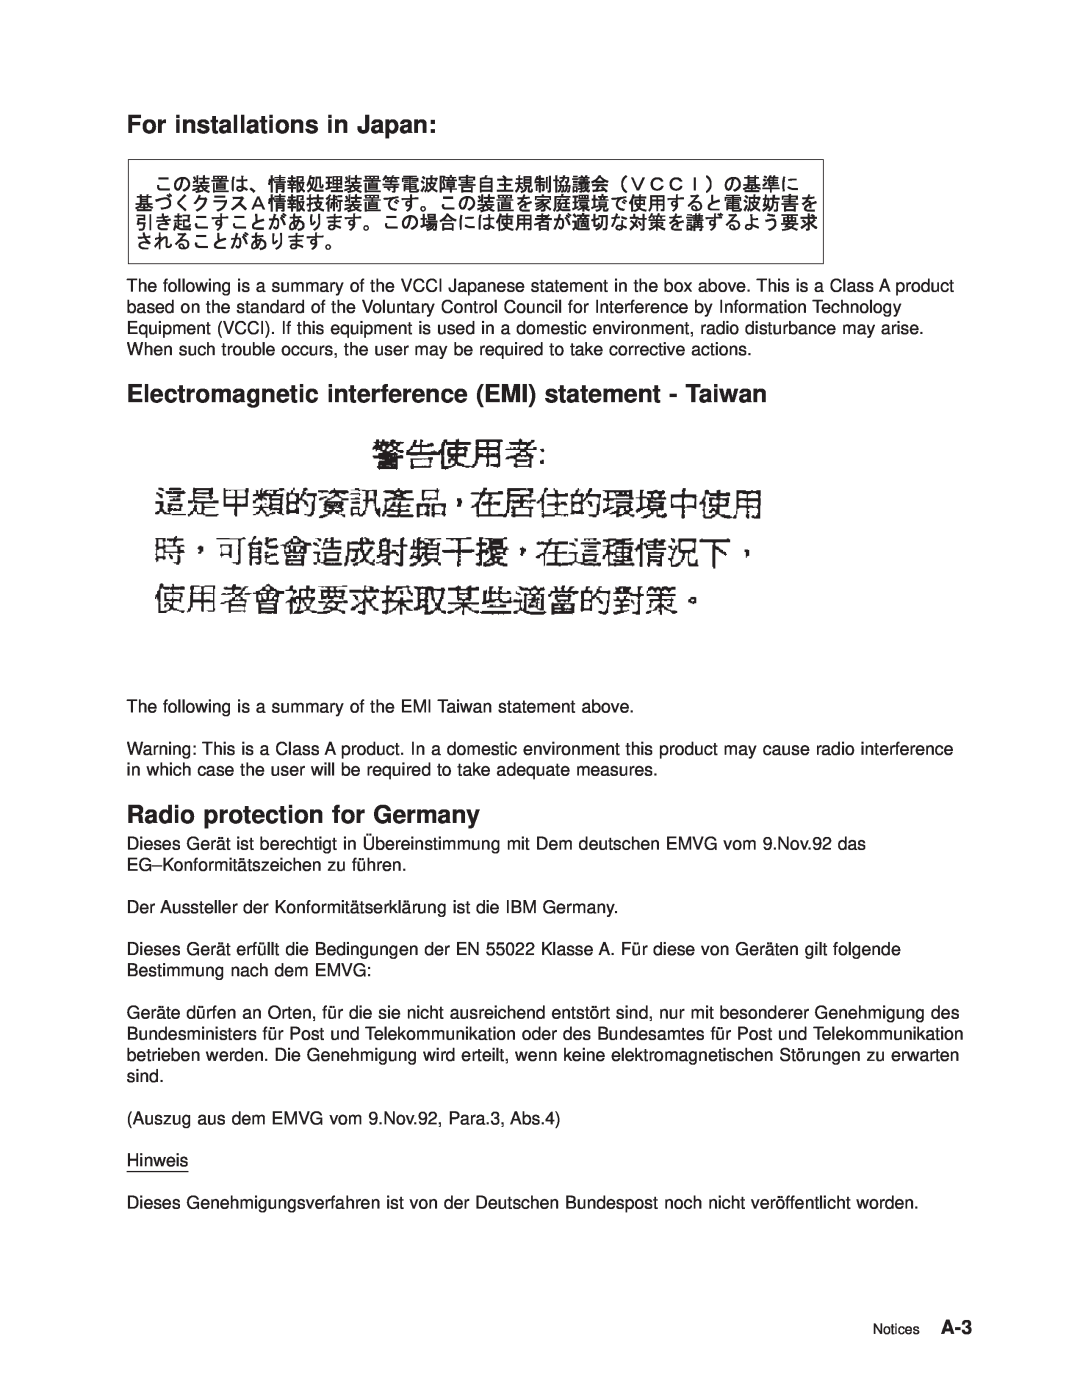 IBM RS/6000 SP manual For installations in Japan, Electromagnetic interference EMI statement - Taiwan 